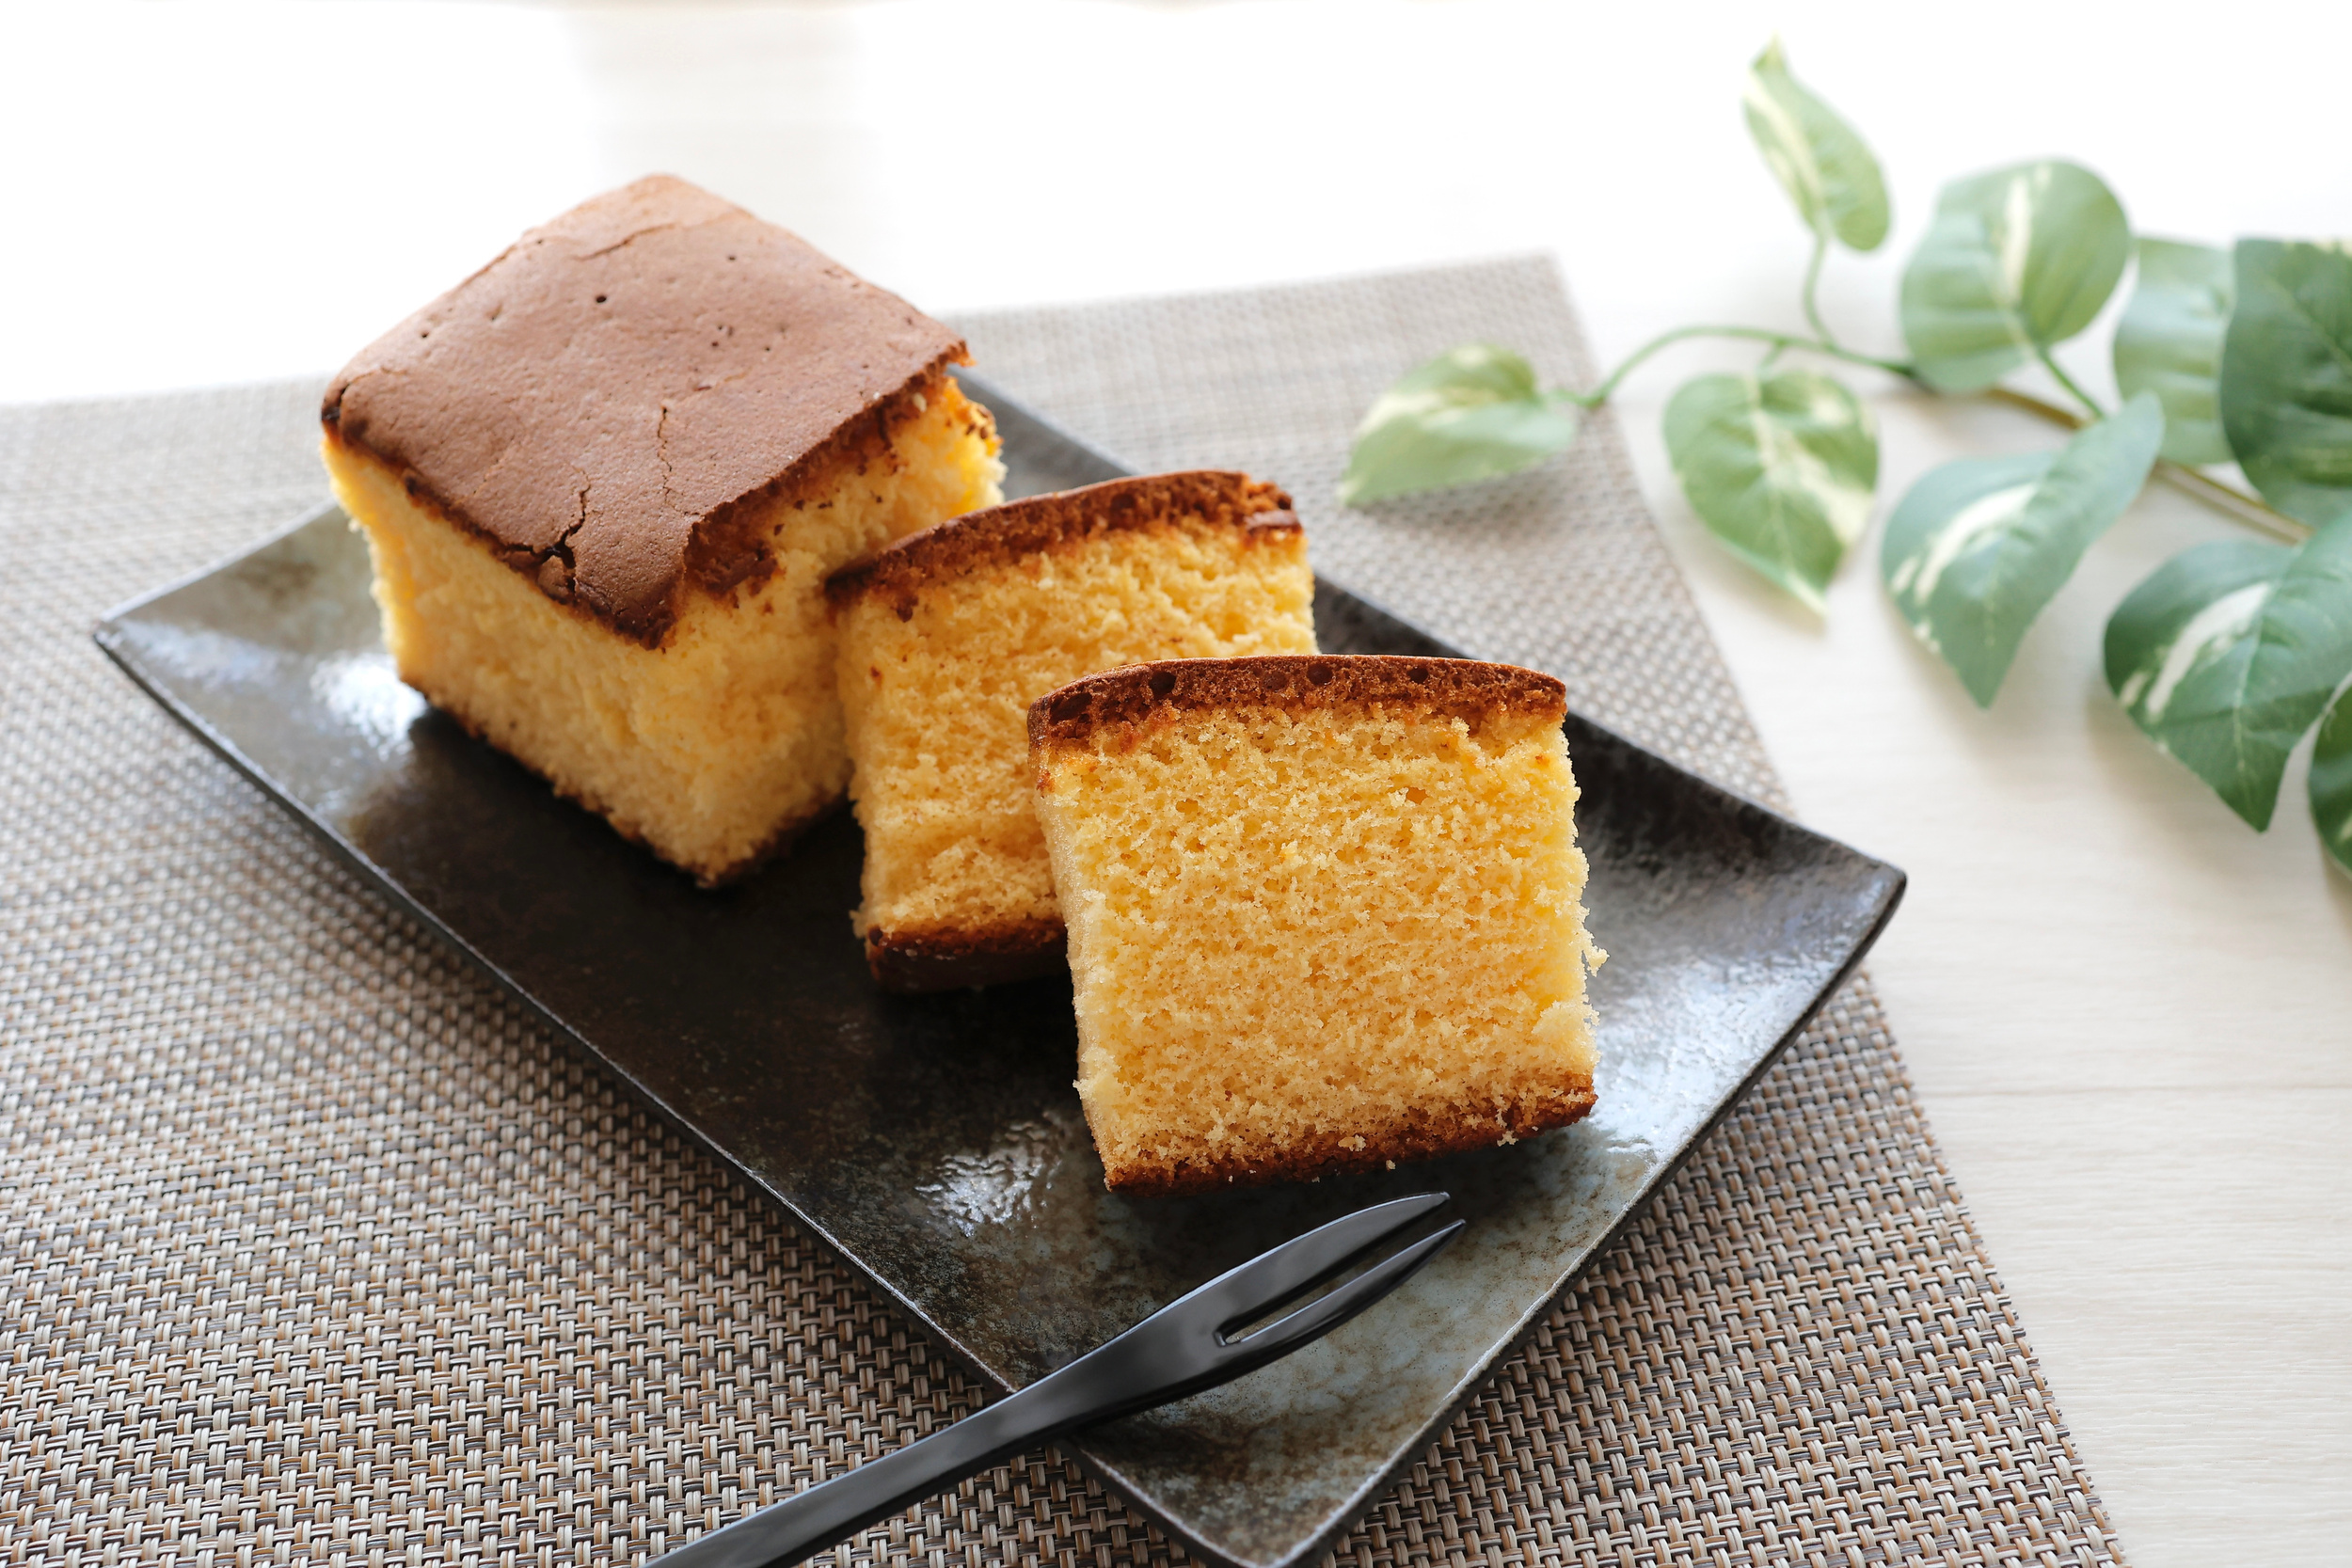 <p><em>Castella</em>, also known as <em>kasutera</em>, is a moist, slightly sweet sponge cake made with flour, sugar, eggs, and a honey syrup, but no butter or oil of any kind...other than non-stick spray, of course. This dessert is an important part of Japanese history, and <a href="https://www.justonecookbook.com/castella/"><span>Just One Cookbook breaks it down for you right here</span></a>.</p><p><a href='https://www.msn.com/en-us/community/channel/vid-cj9pqbr0vn9in2b6ddcd8sfgpfq6x6utp44fssrv6mc2gtybw0us'>Follow us on MSN to see more of our exclusive lifestyle content.</a></p>